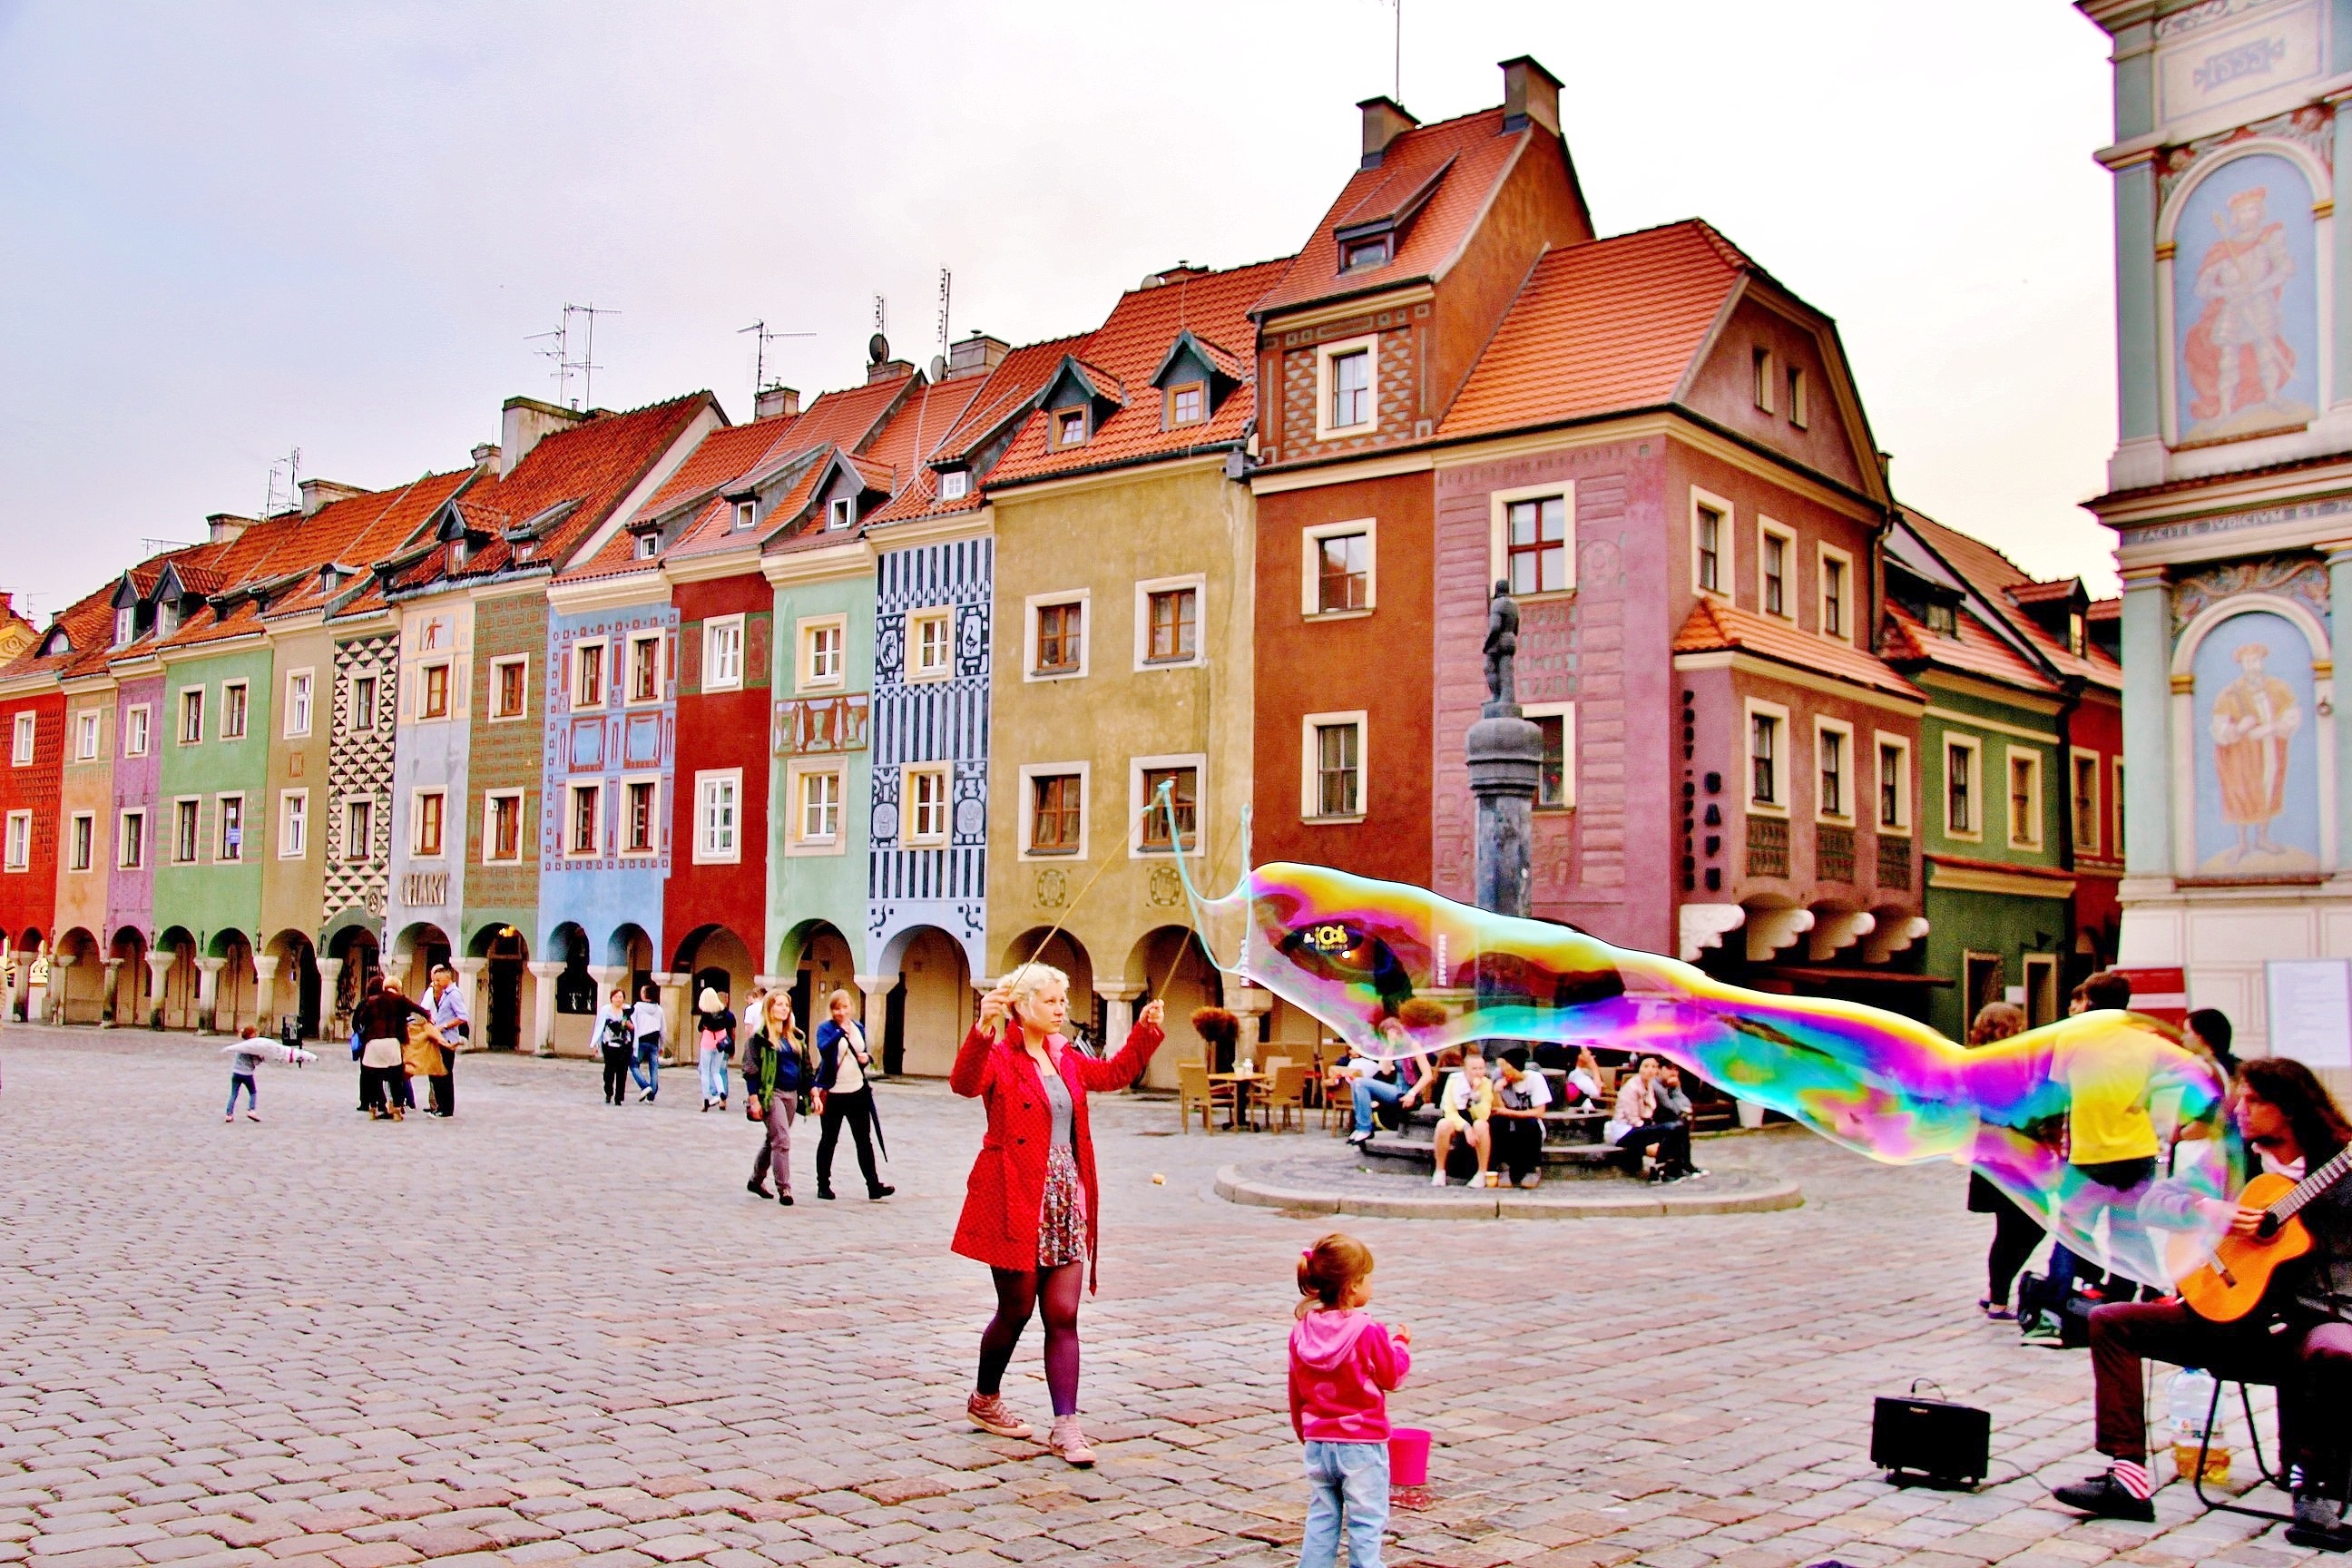 Merchant houses in Poznan's old market square